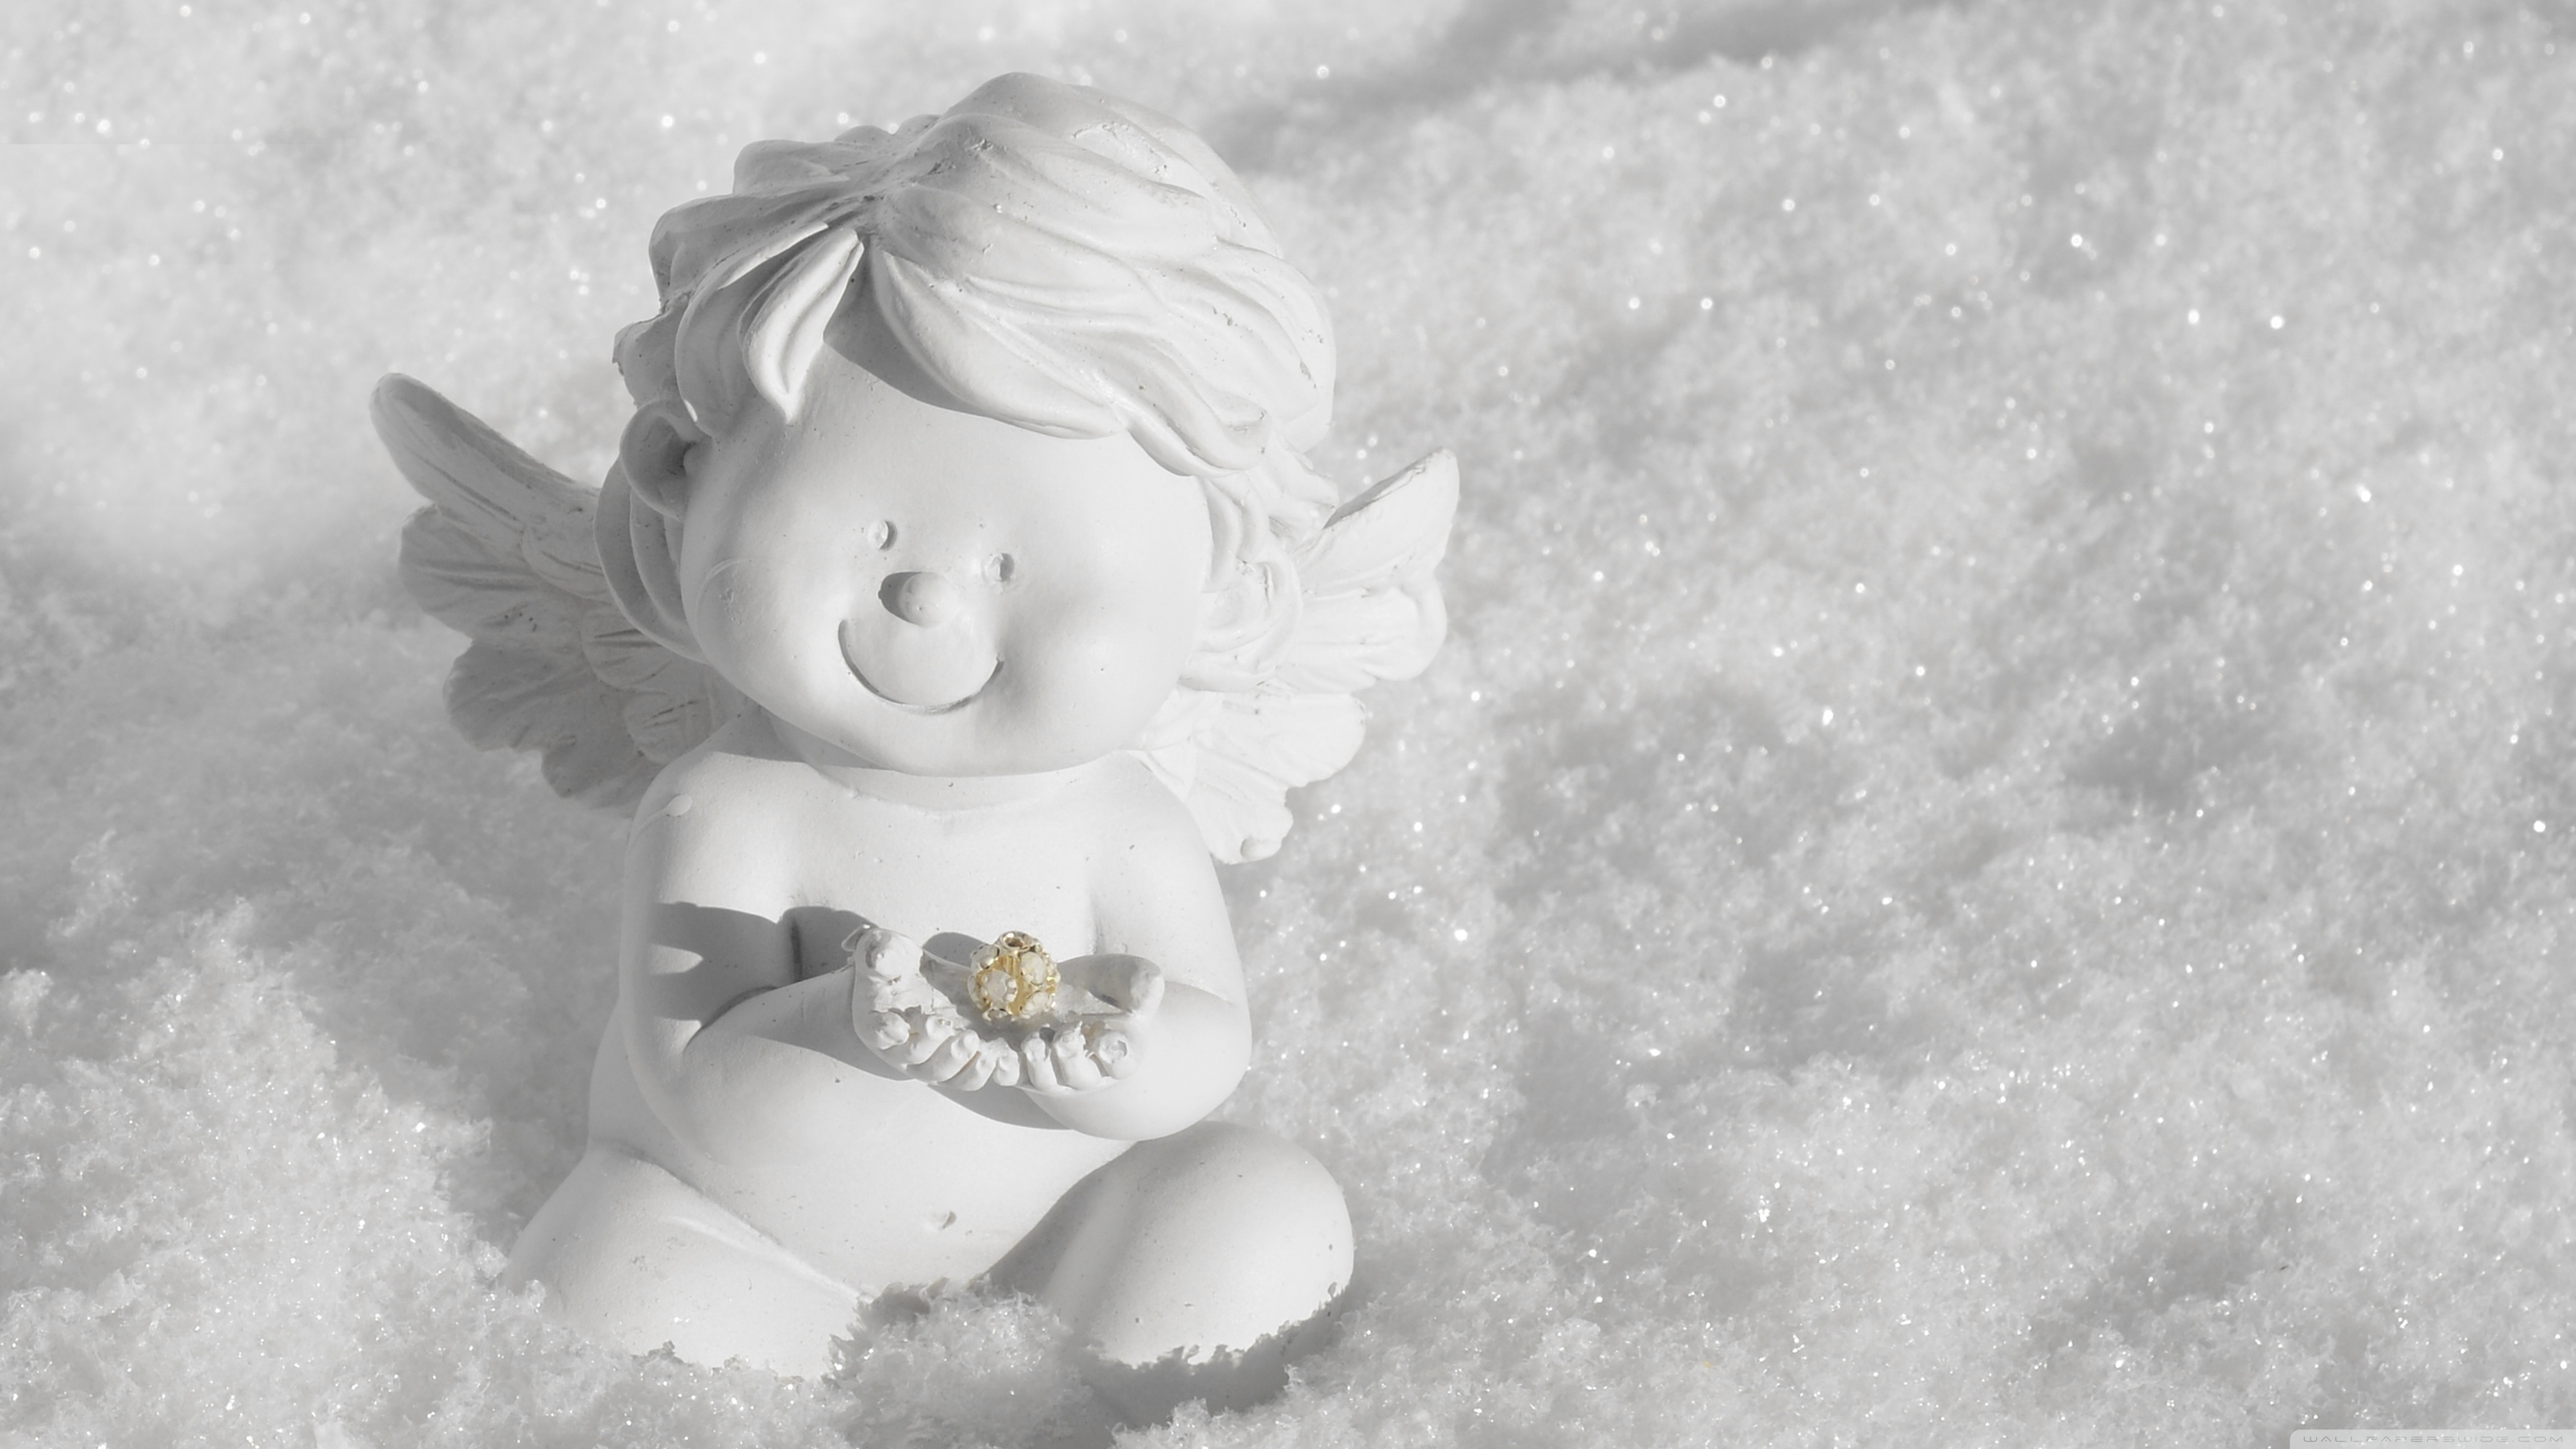 Cute Angels Images Hd , HD Wallpaper & Backgrounds